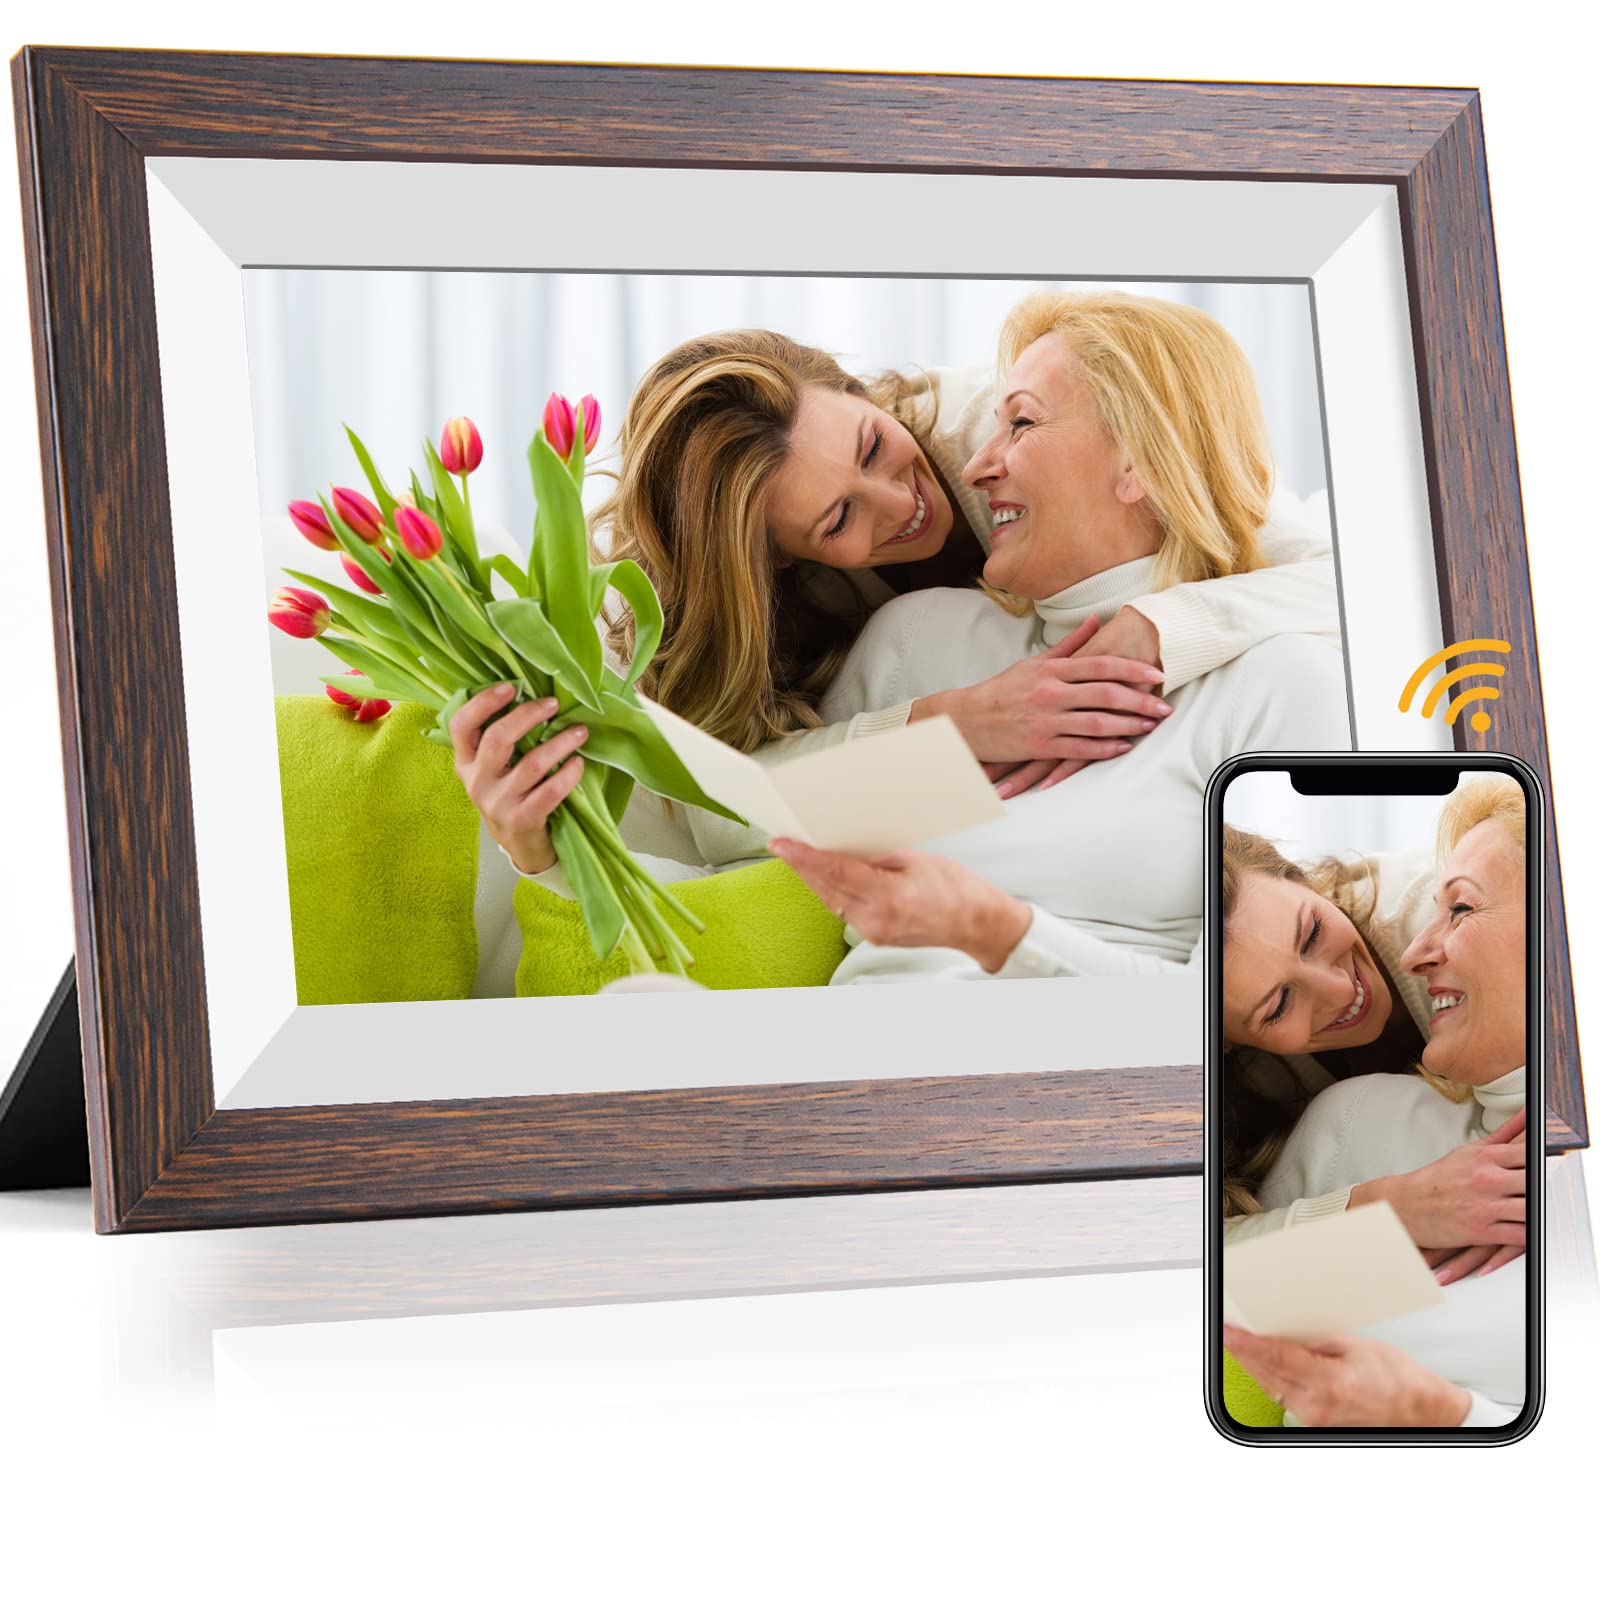 How To Buy Digital Picture Frame